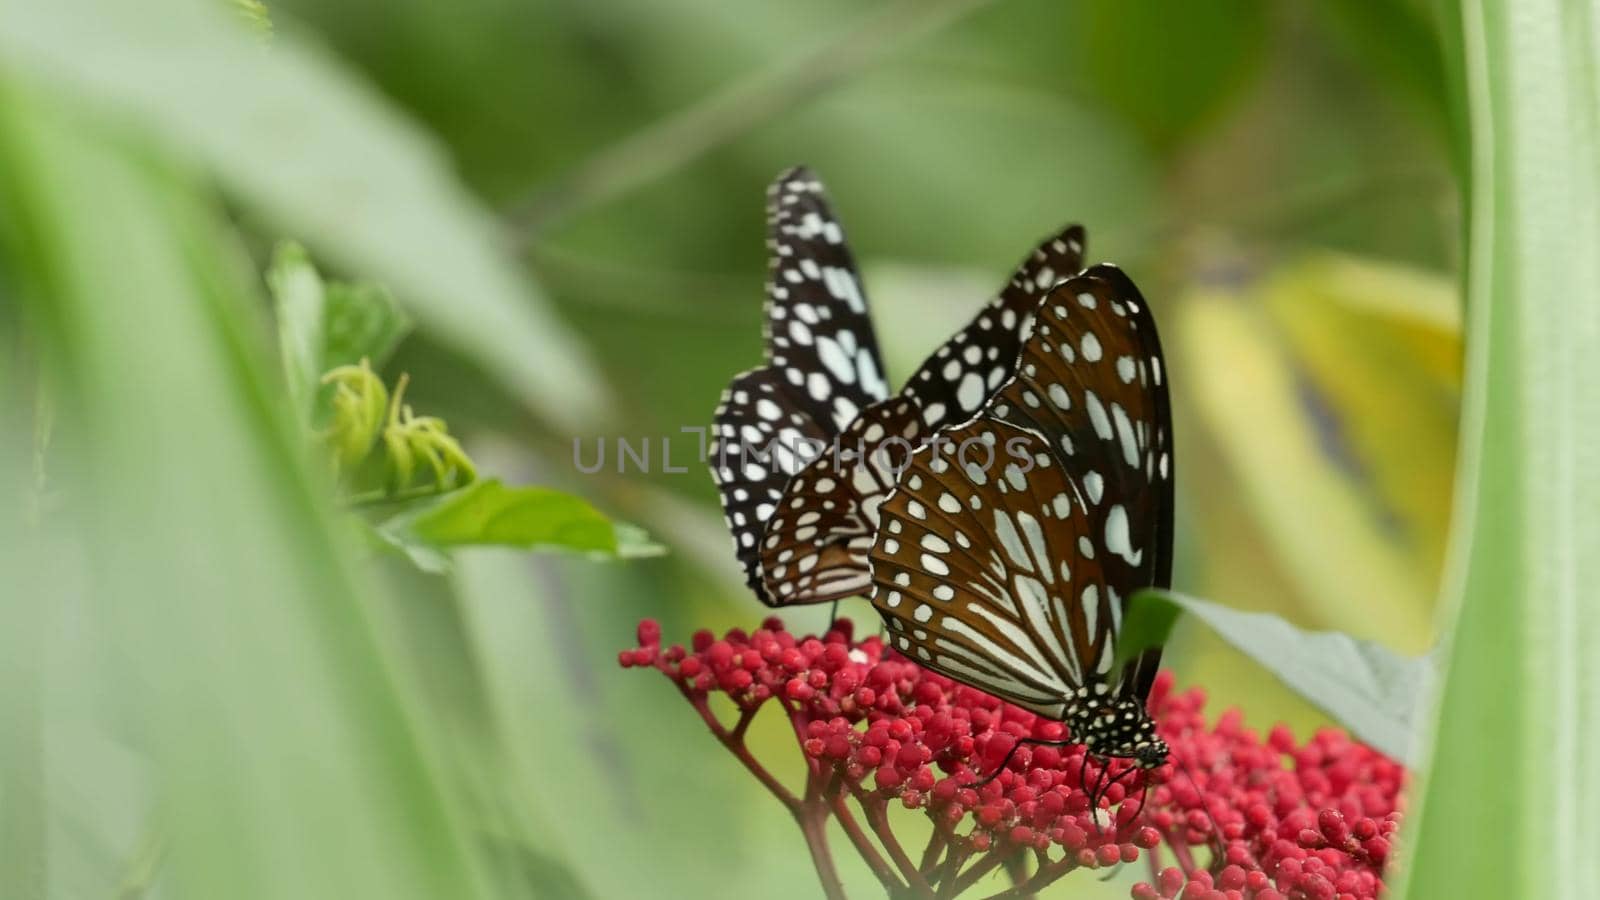 Tropical exotic butterfly in jungle rainforest sitting on green leaves, macro close up. Spring paradise, lush foliage natural background, defocused greenery in the woods. Fresh sunny romantic garden.